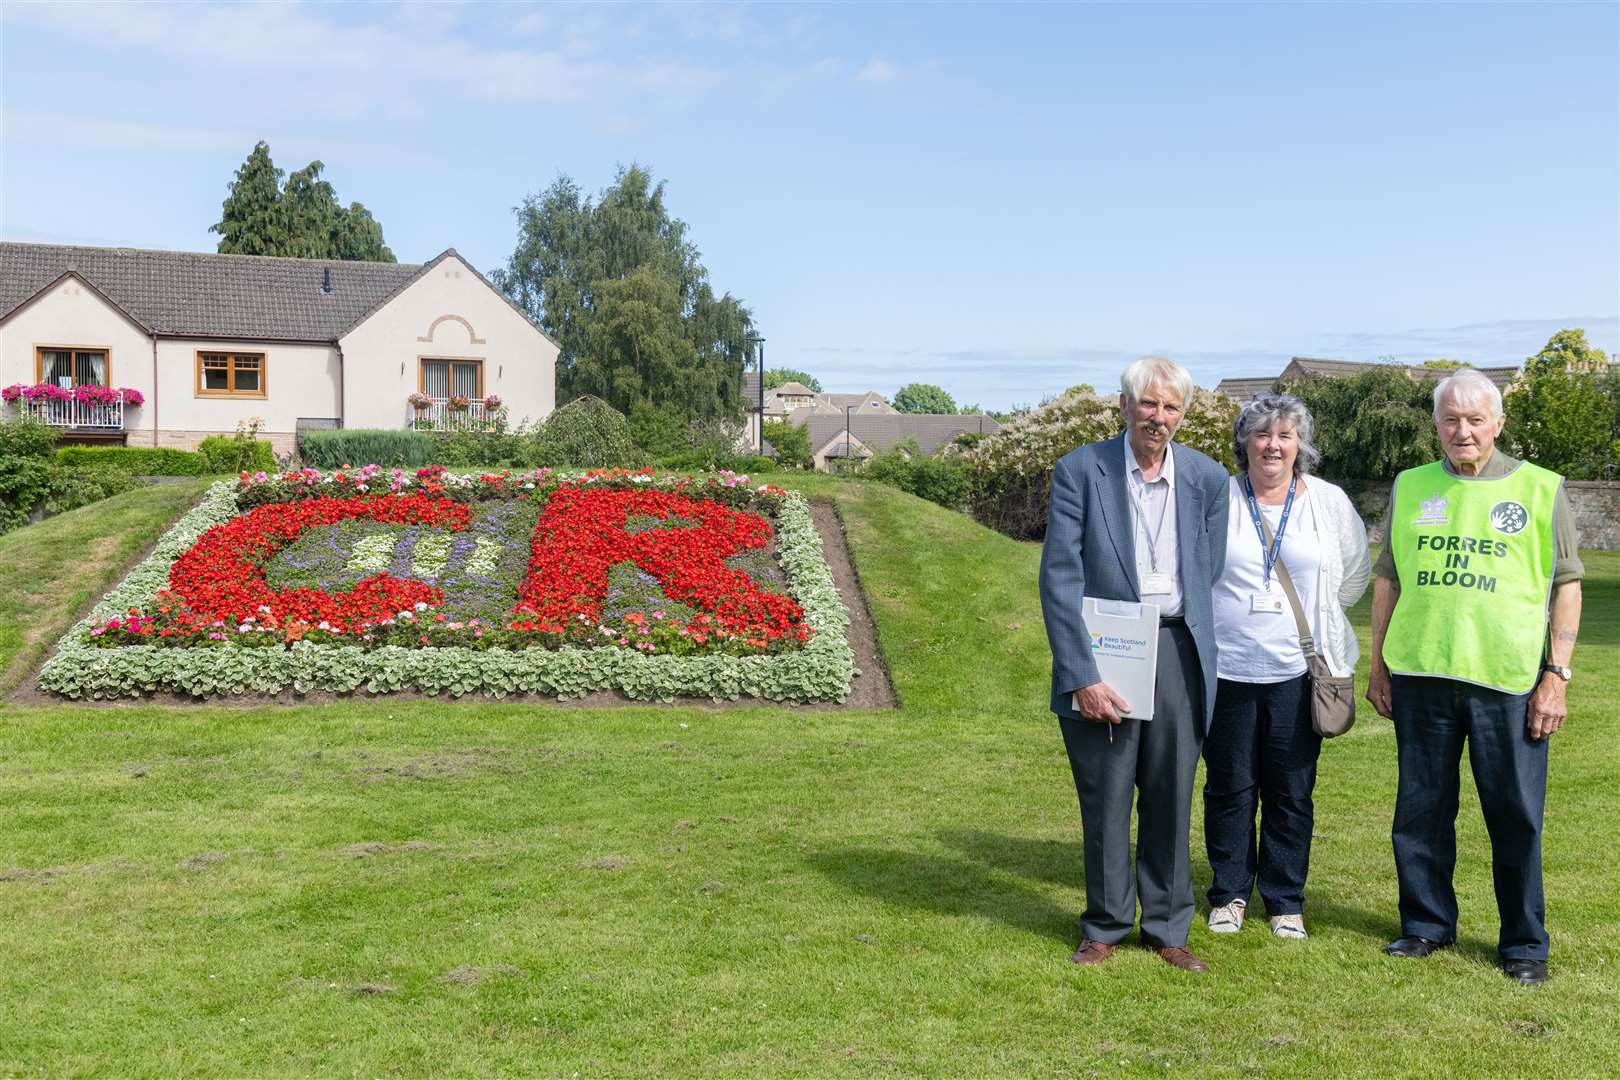 Bob Davidson of Forres In Bloom (right) with the Keep Scotland Beautiful judges Terry Stott and Penny Wright.